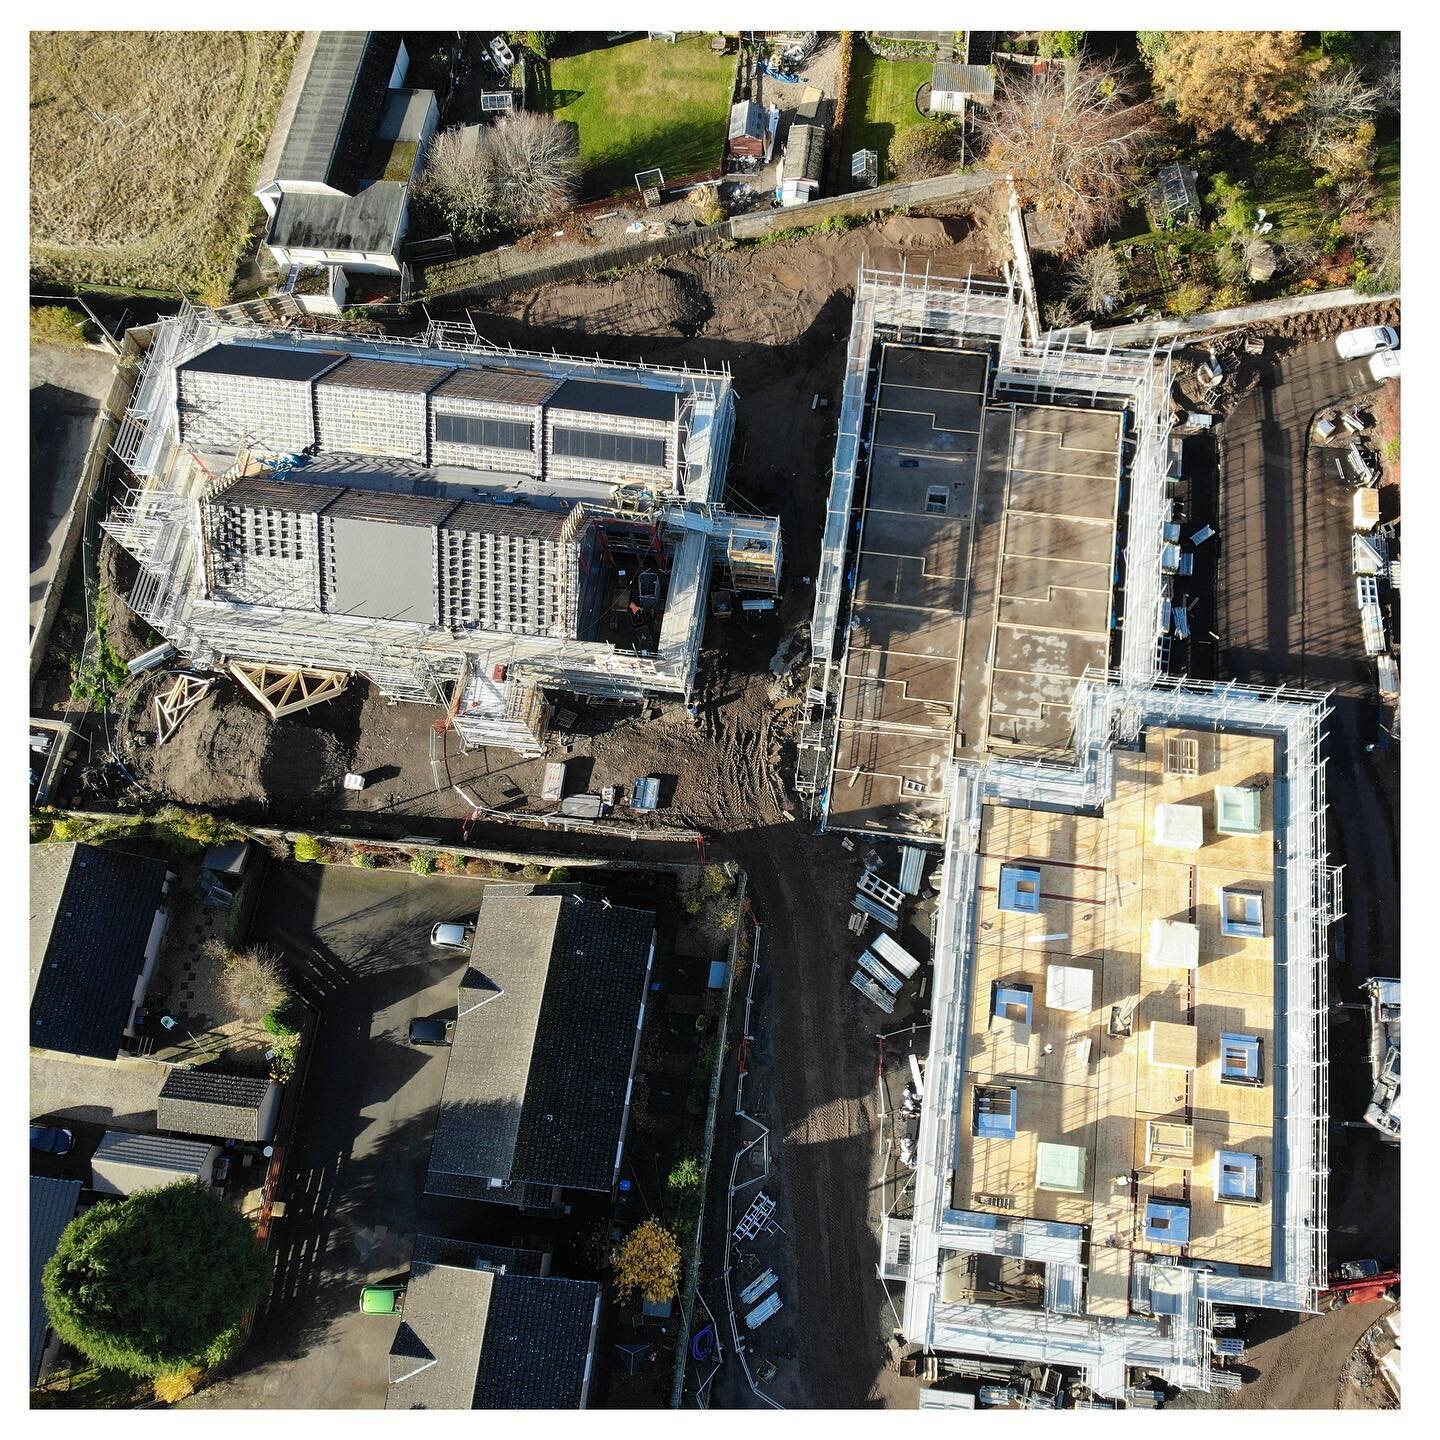 We are very excited to see the progress on site from the air this week at one of our retirement living facilities in Scone, Scotland. The scheme for Juniper Residential will create 51 apartments and associated communal spaces set in the heart of the 